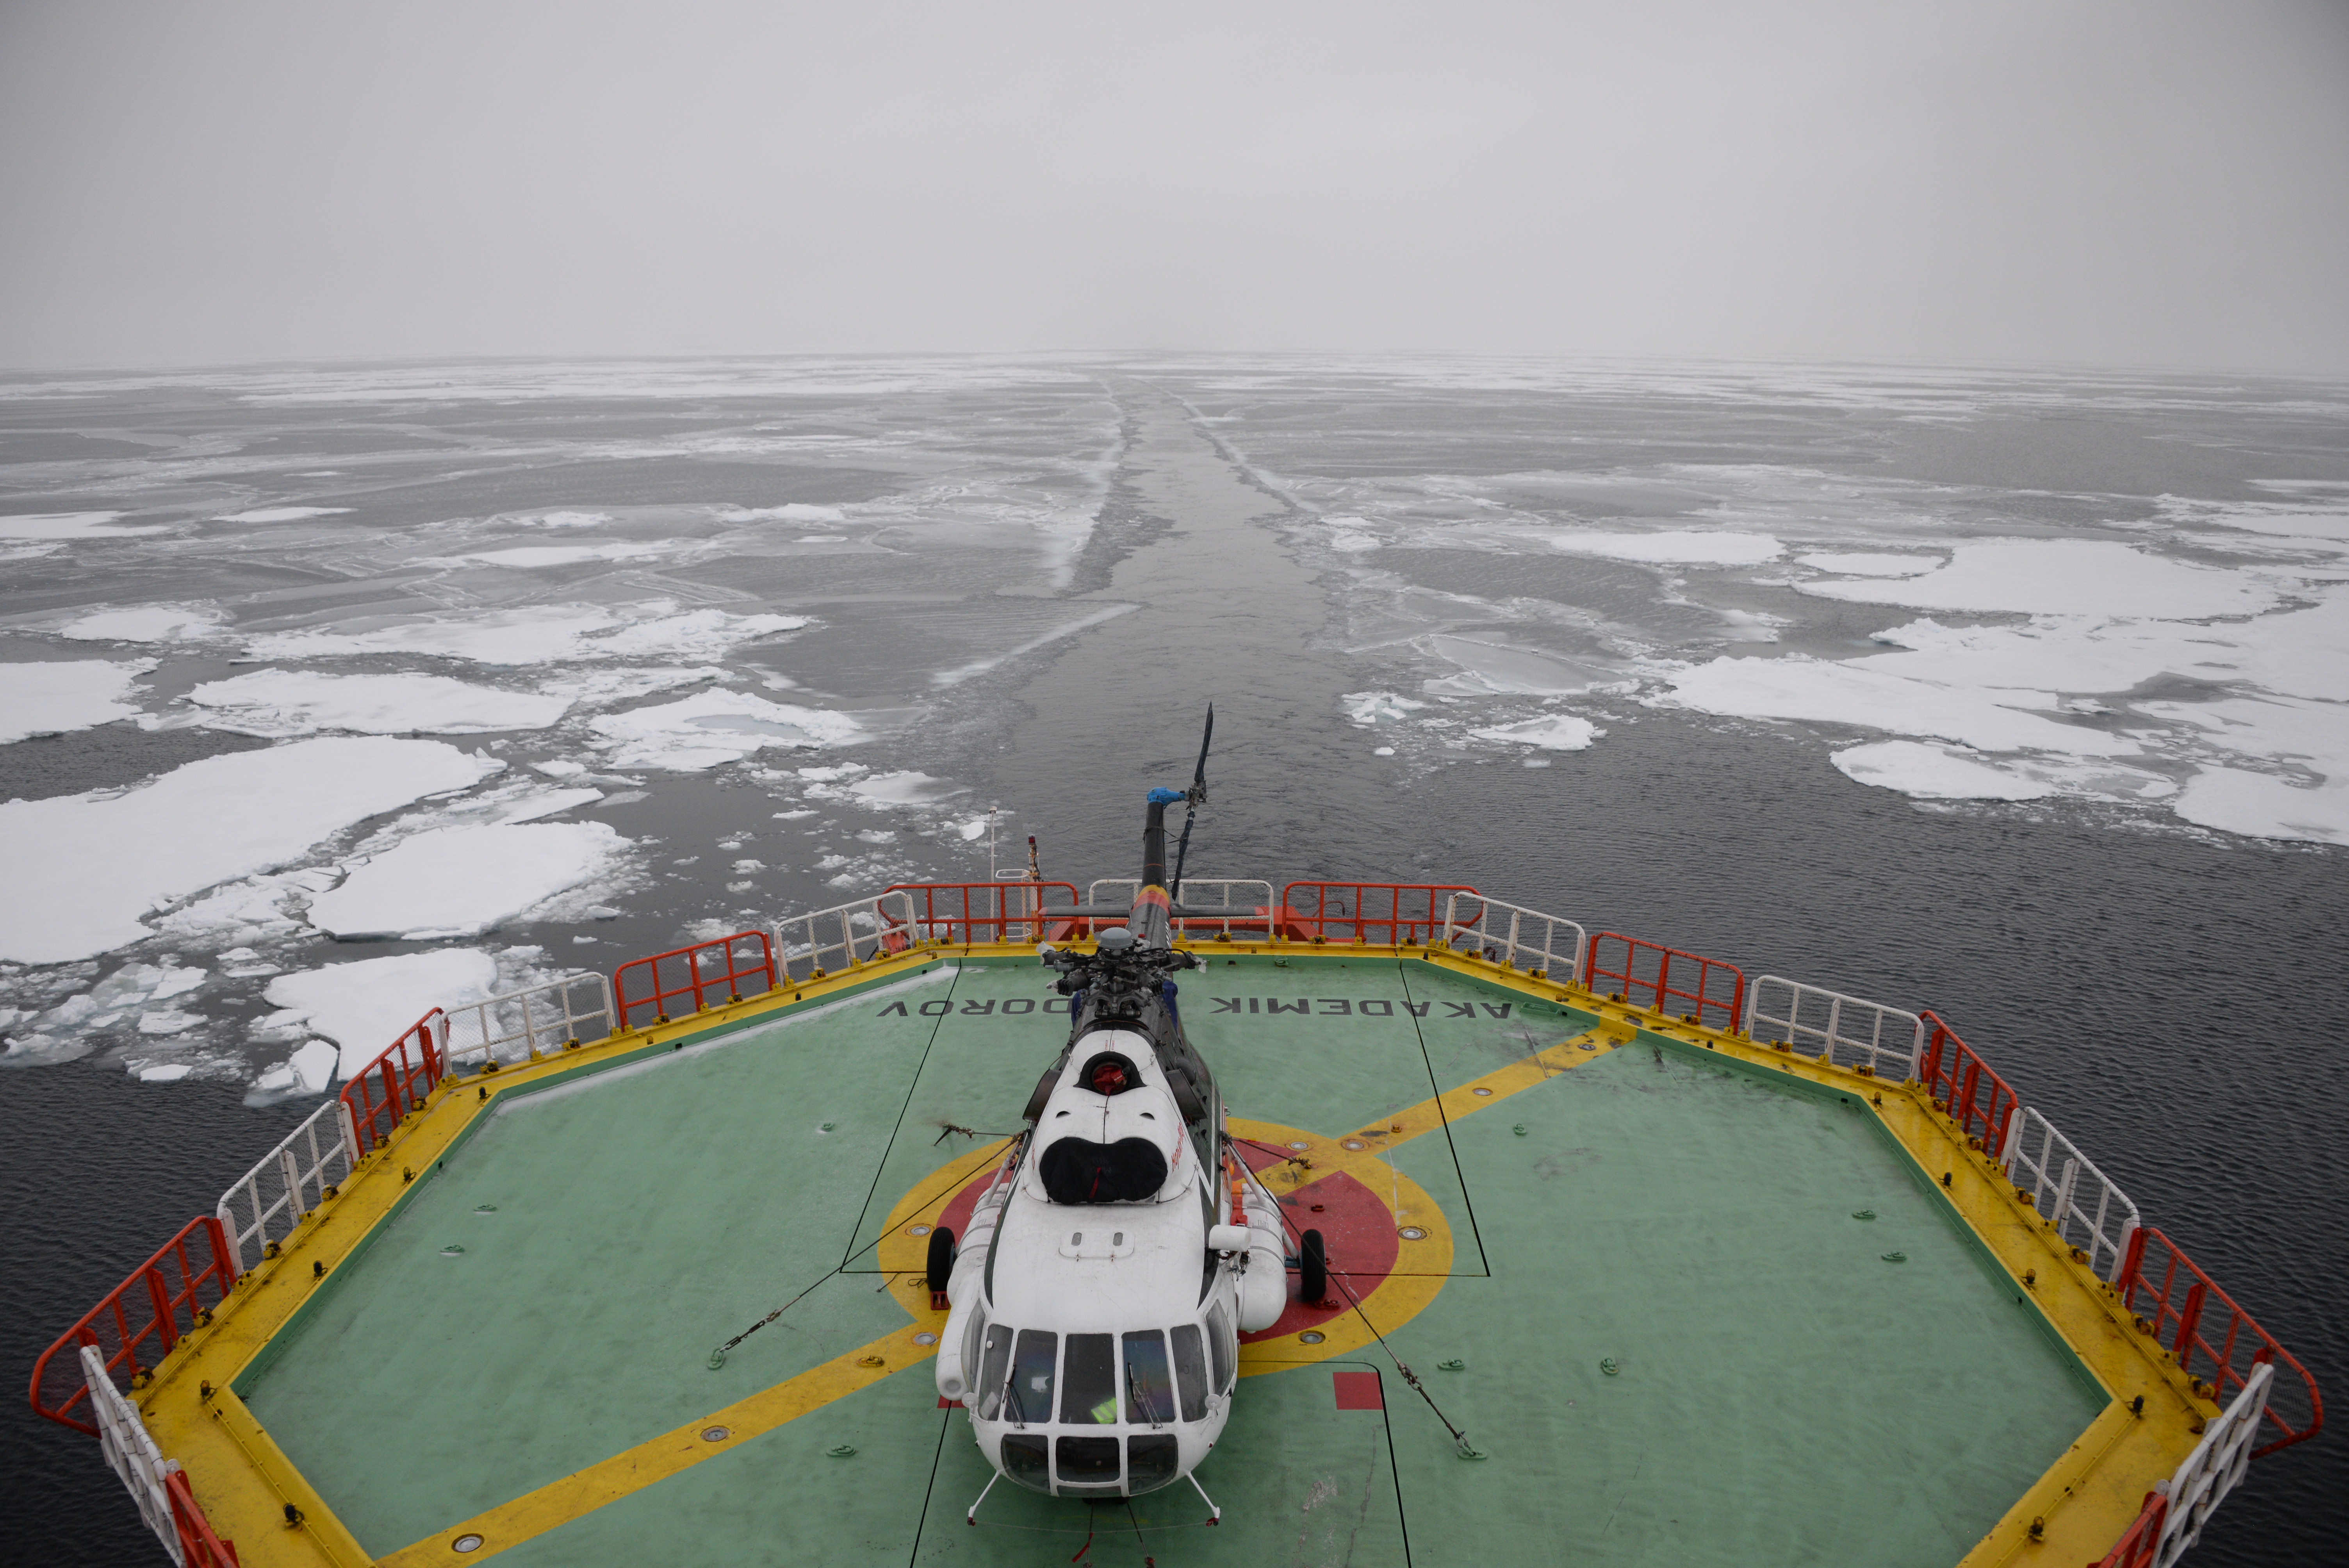 Sea ice photo from the Fedorov